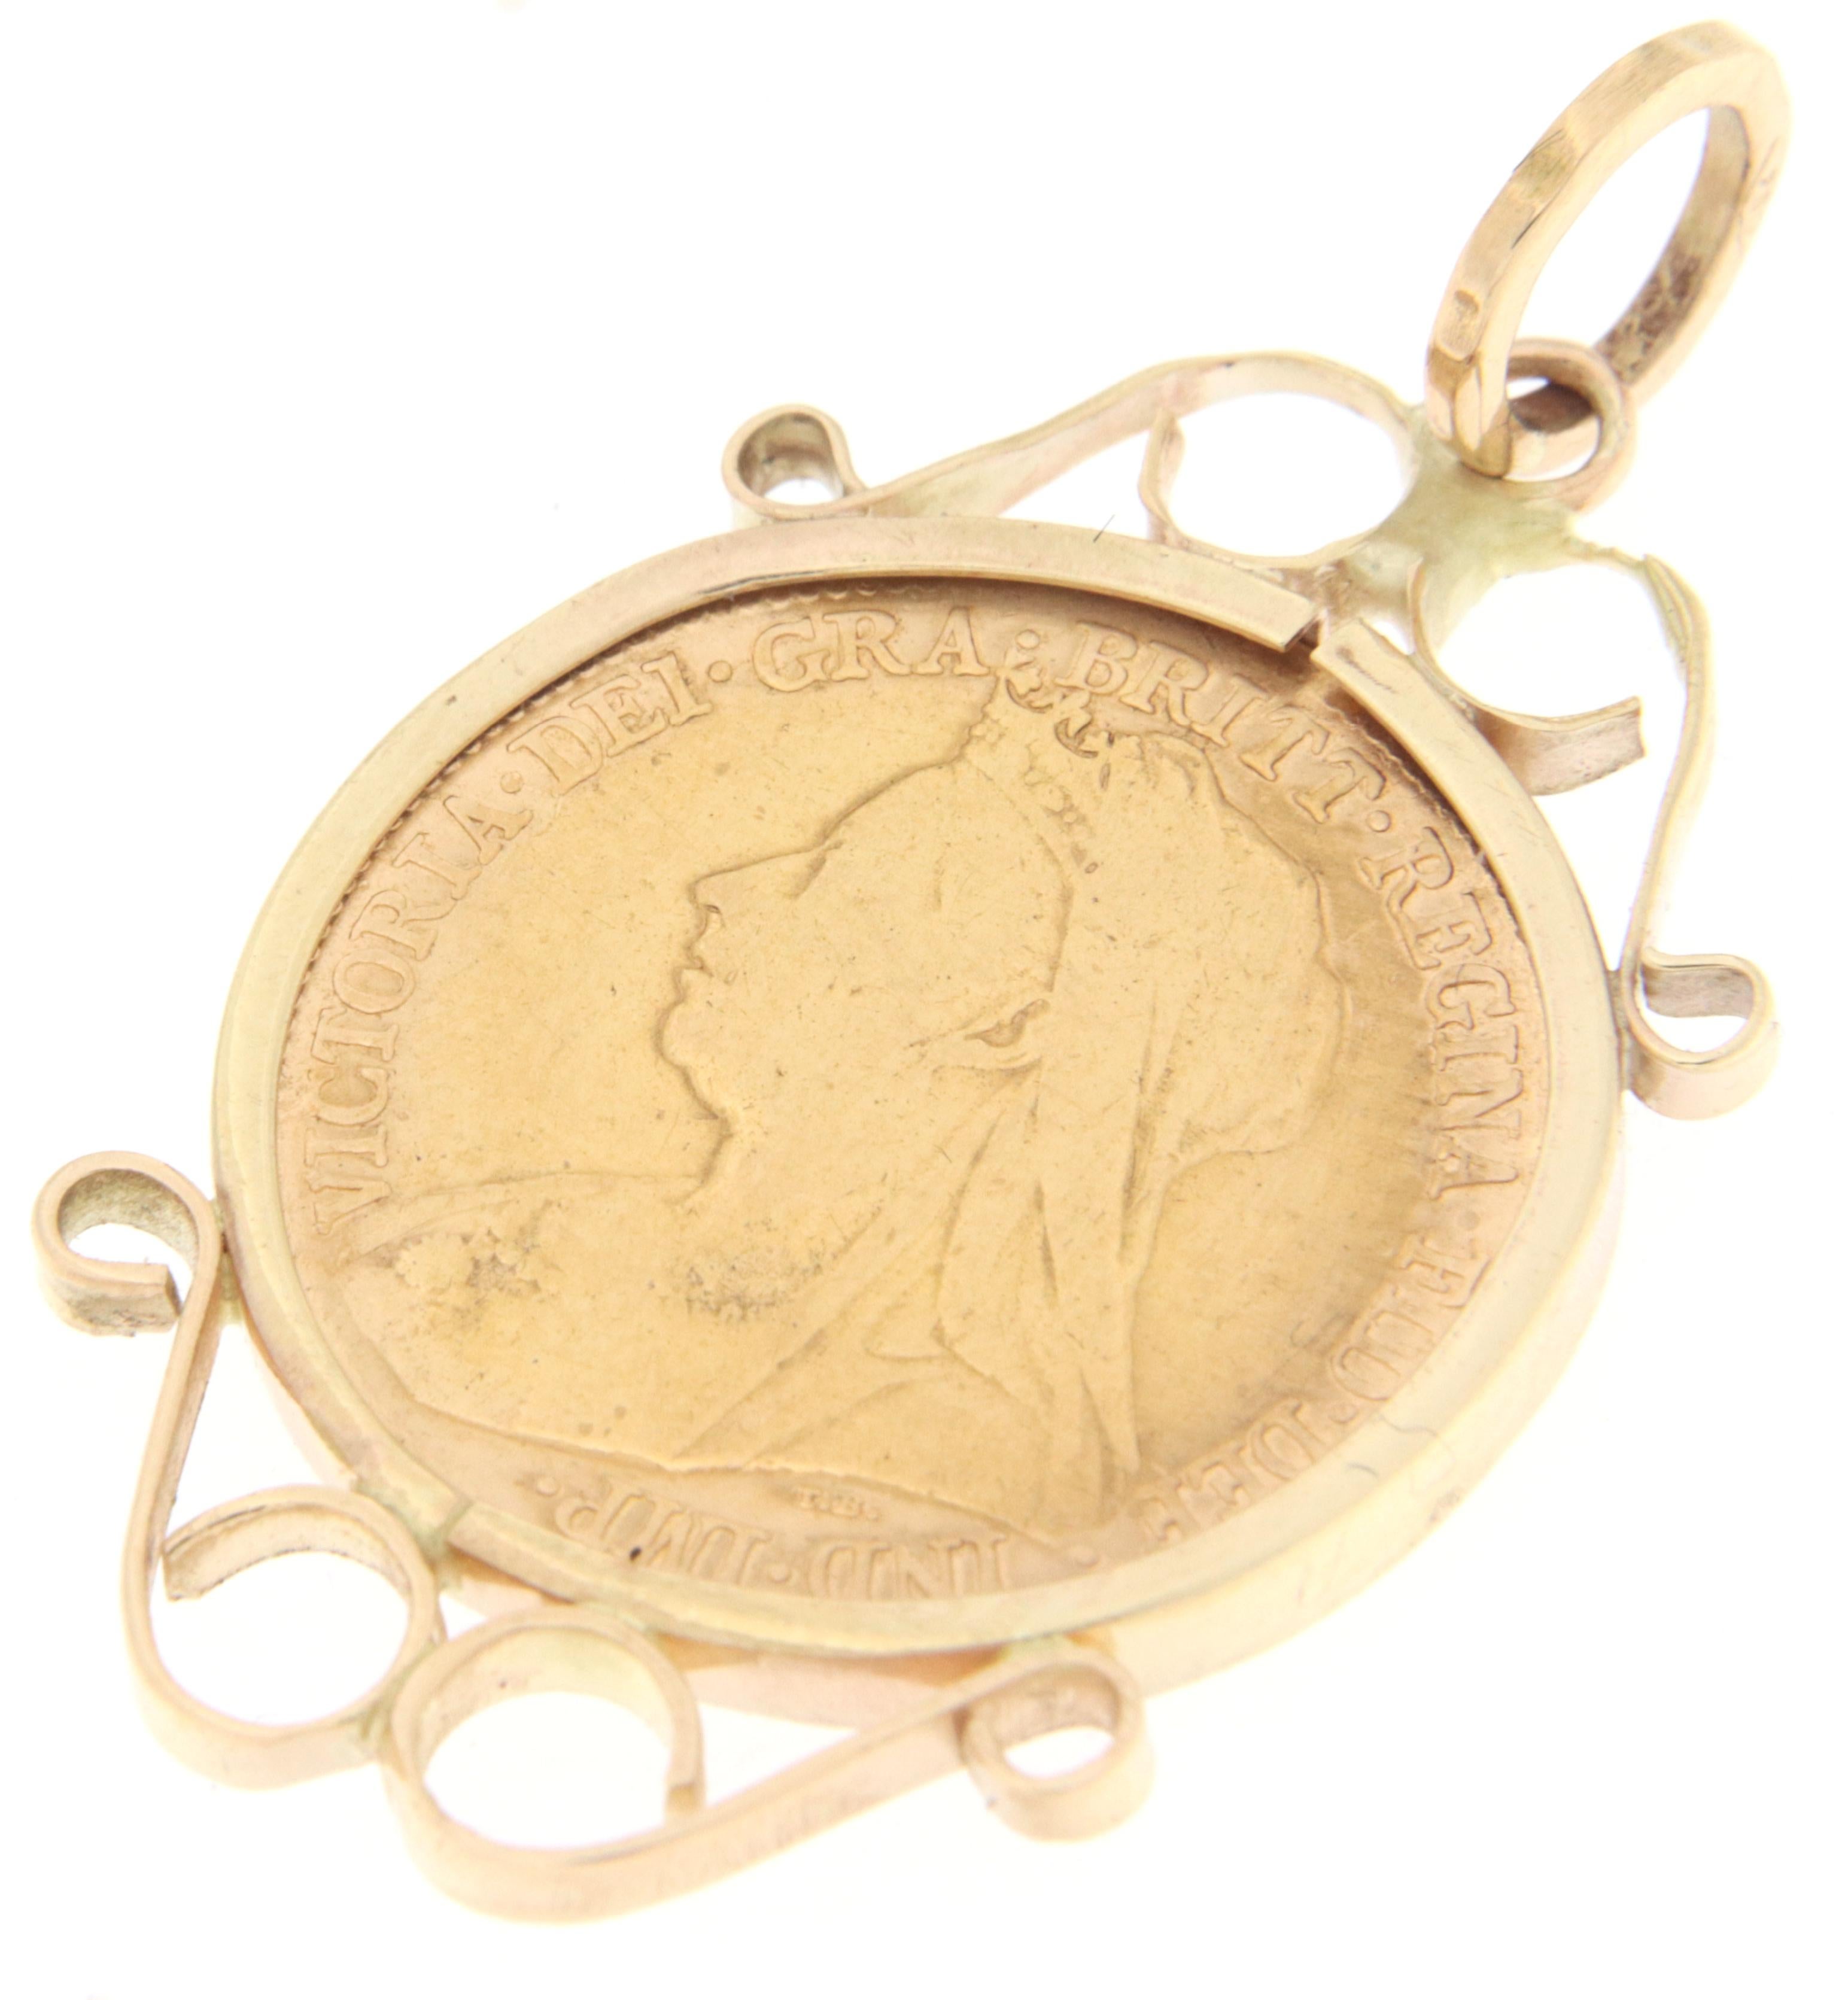 Fantastic ancient 18 karat yellow gold pendant mounted with antique british coin in 22 karat yellow gold
Coins are in 22 karat gold

Pendant total weight 5.30 grams
Chain is not included in the price